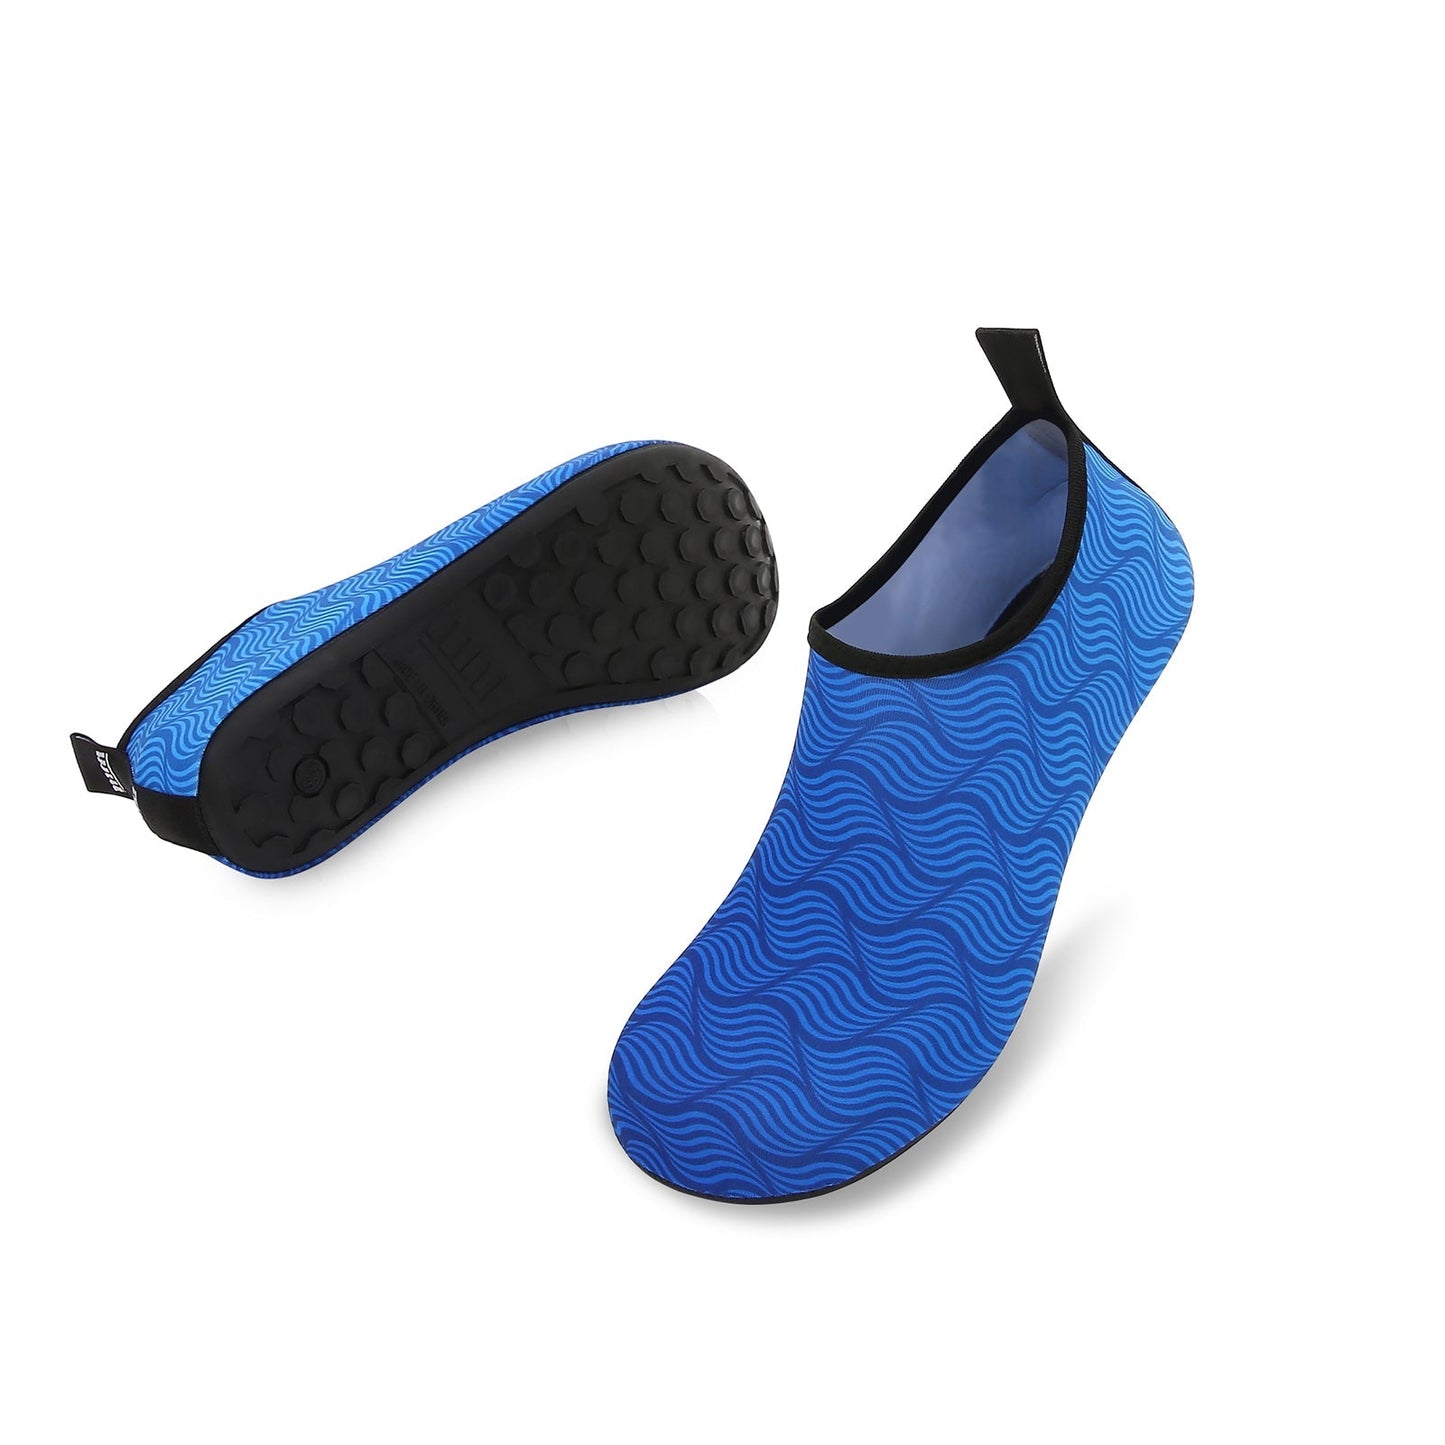 Men and Women a Slip On Barefoot Quick-Dry Beach Aqua Yoga Water Shoes (Multi wave/Blue)